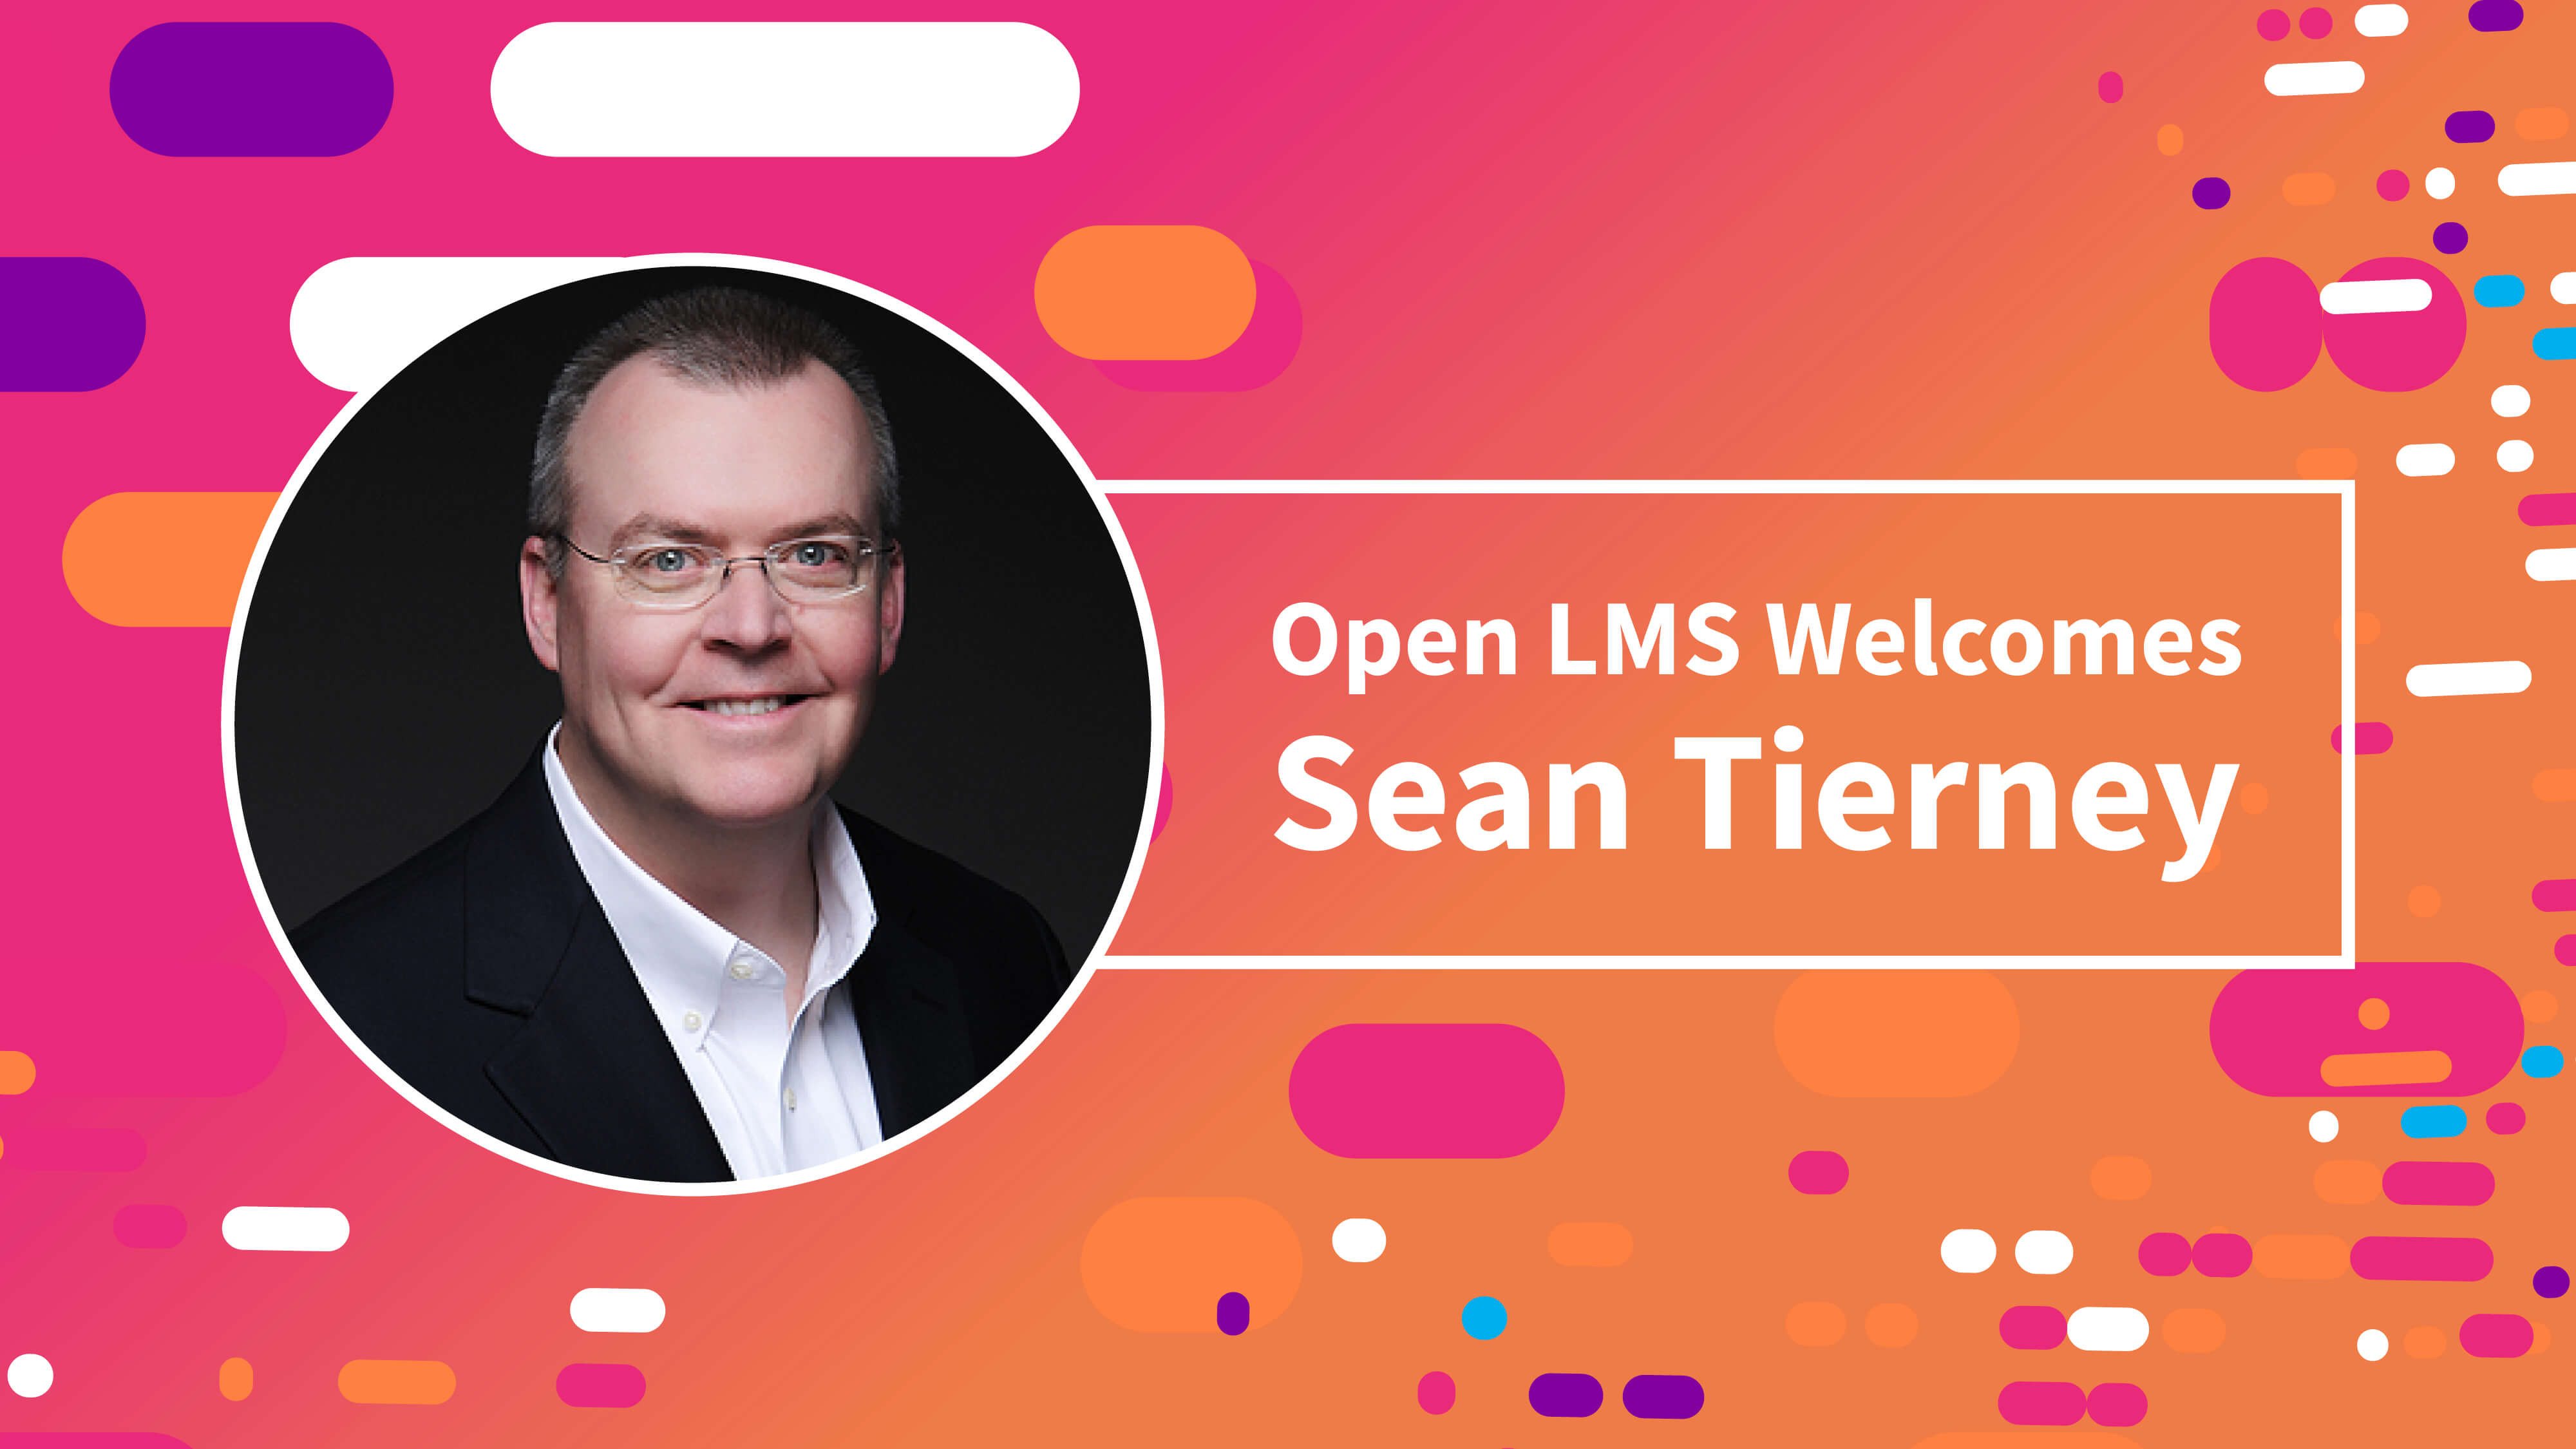 Sean Tierney joins Open LMS as the new Vice President of Customer Success